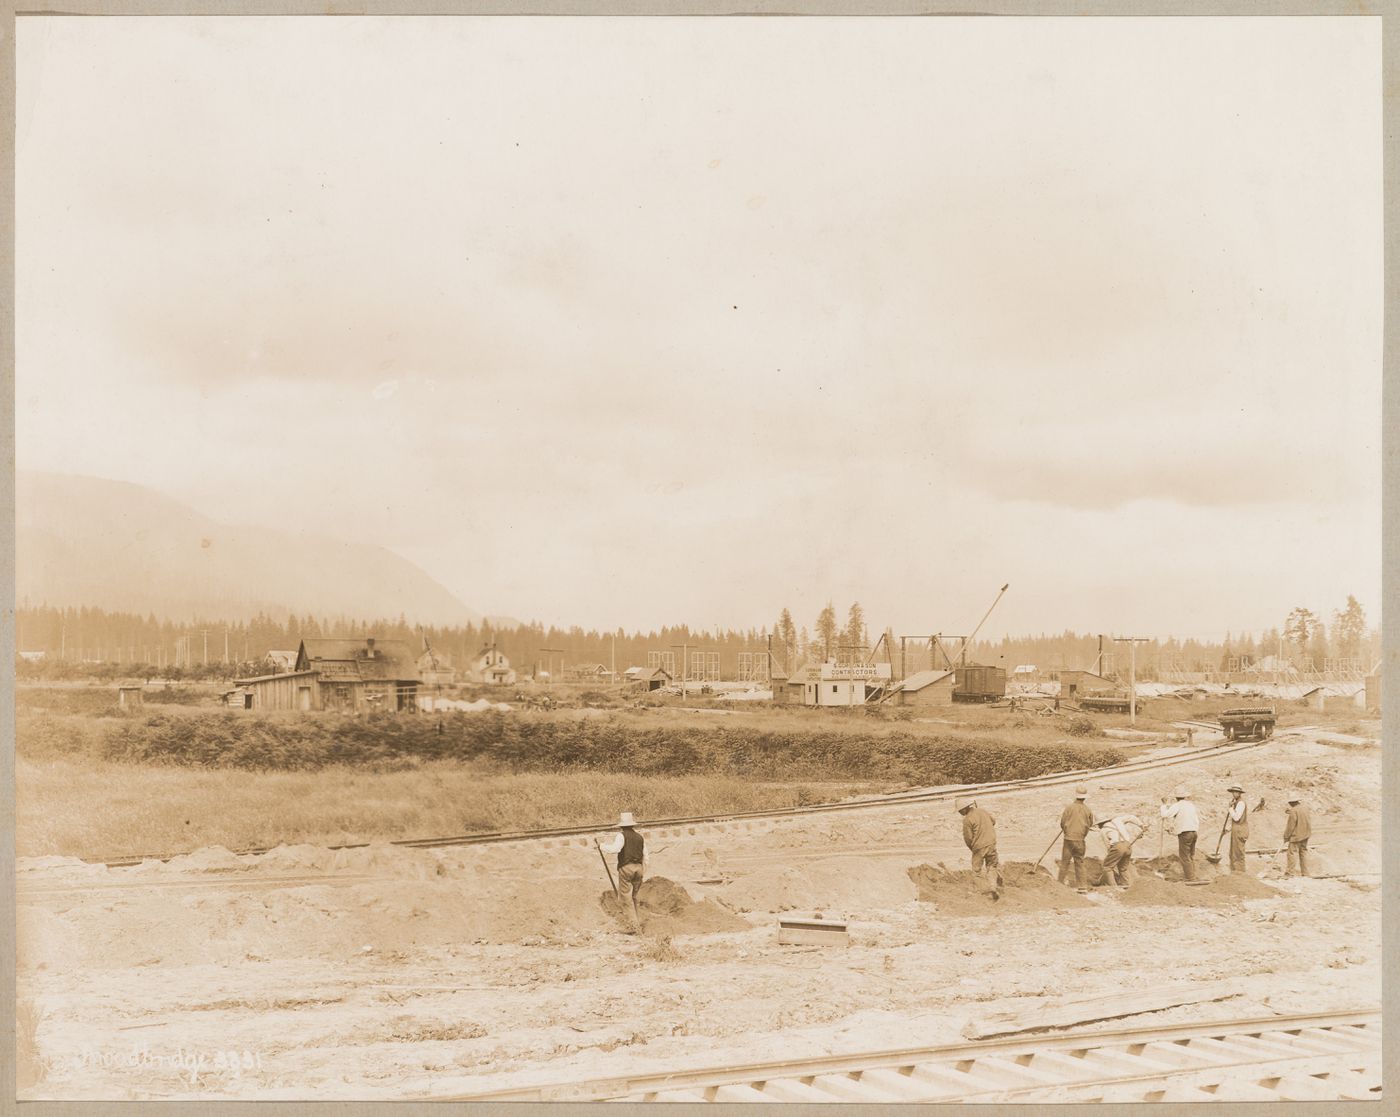 View of the Canadian Pacific Railroad Company freight yards and Roundhouse (centre background) under construction, Coquitlam (now Port Coquitlam), British Columbia